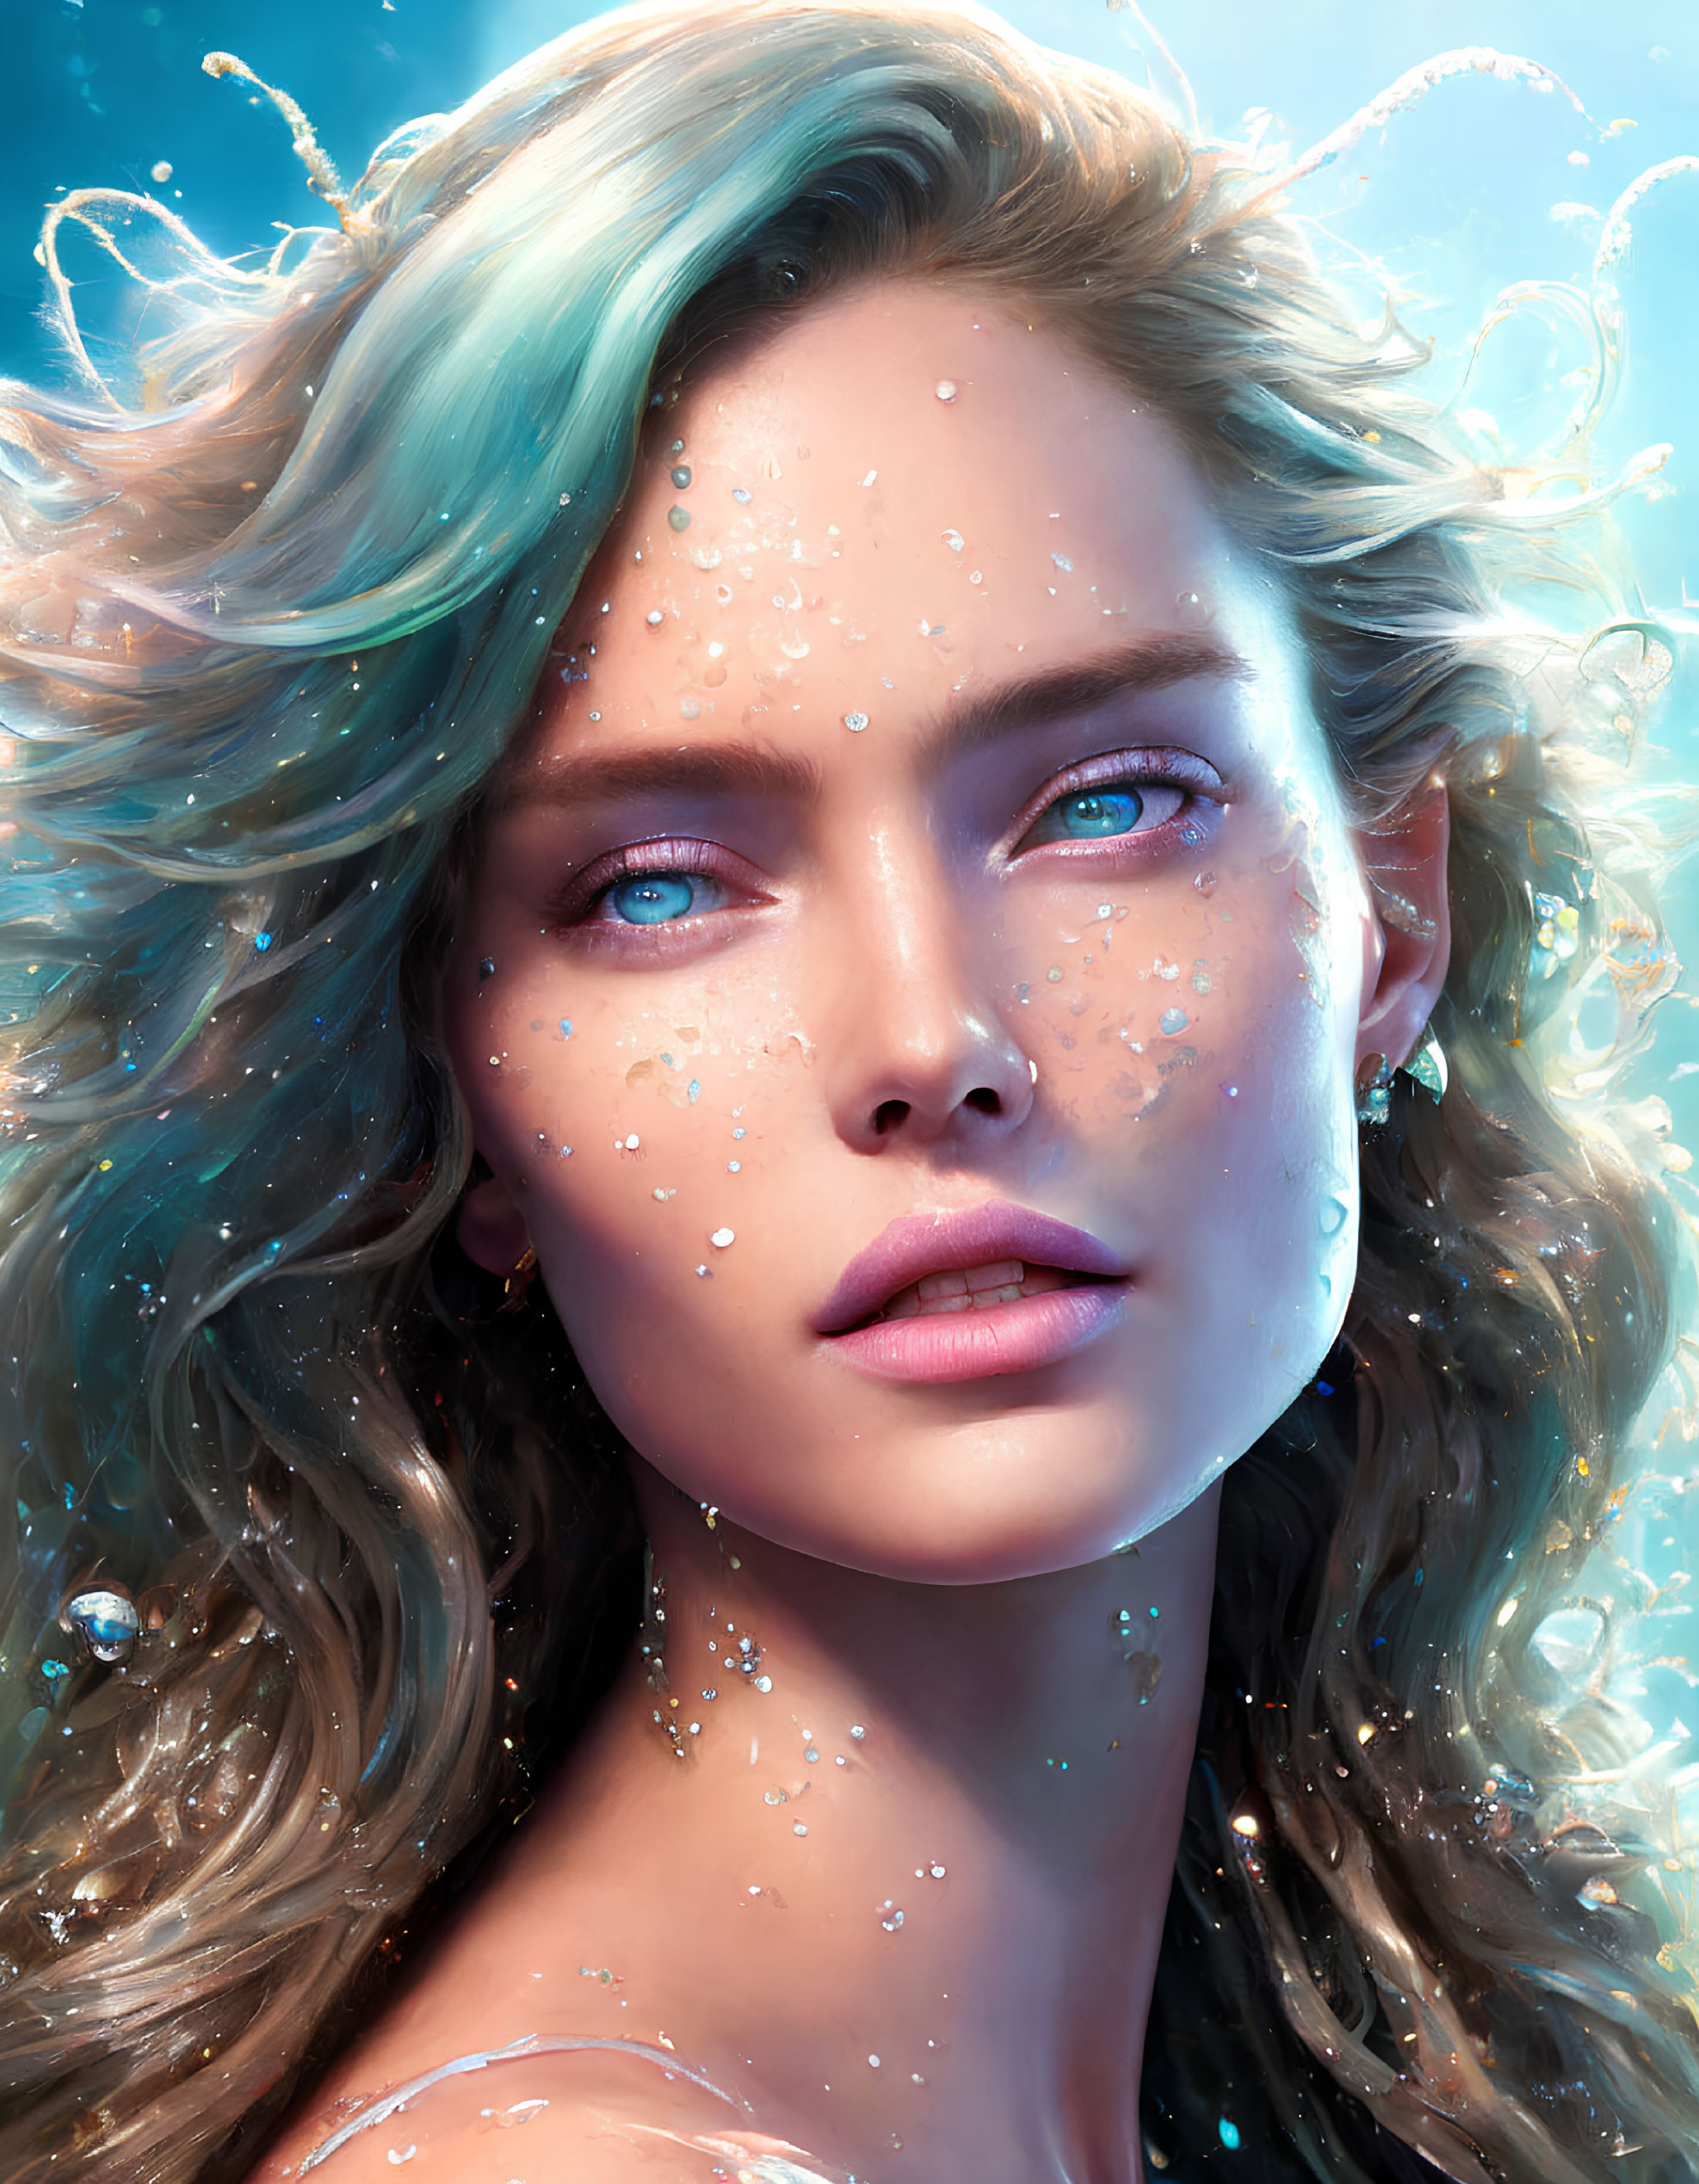 Portrait of woman with blue eyes, tousled hair, and water droplets on skin